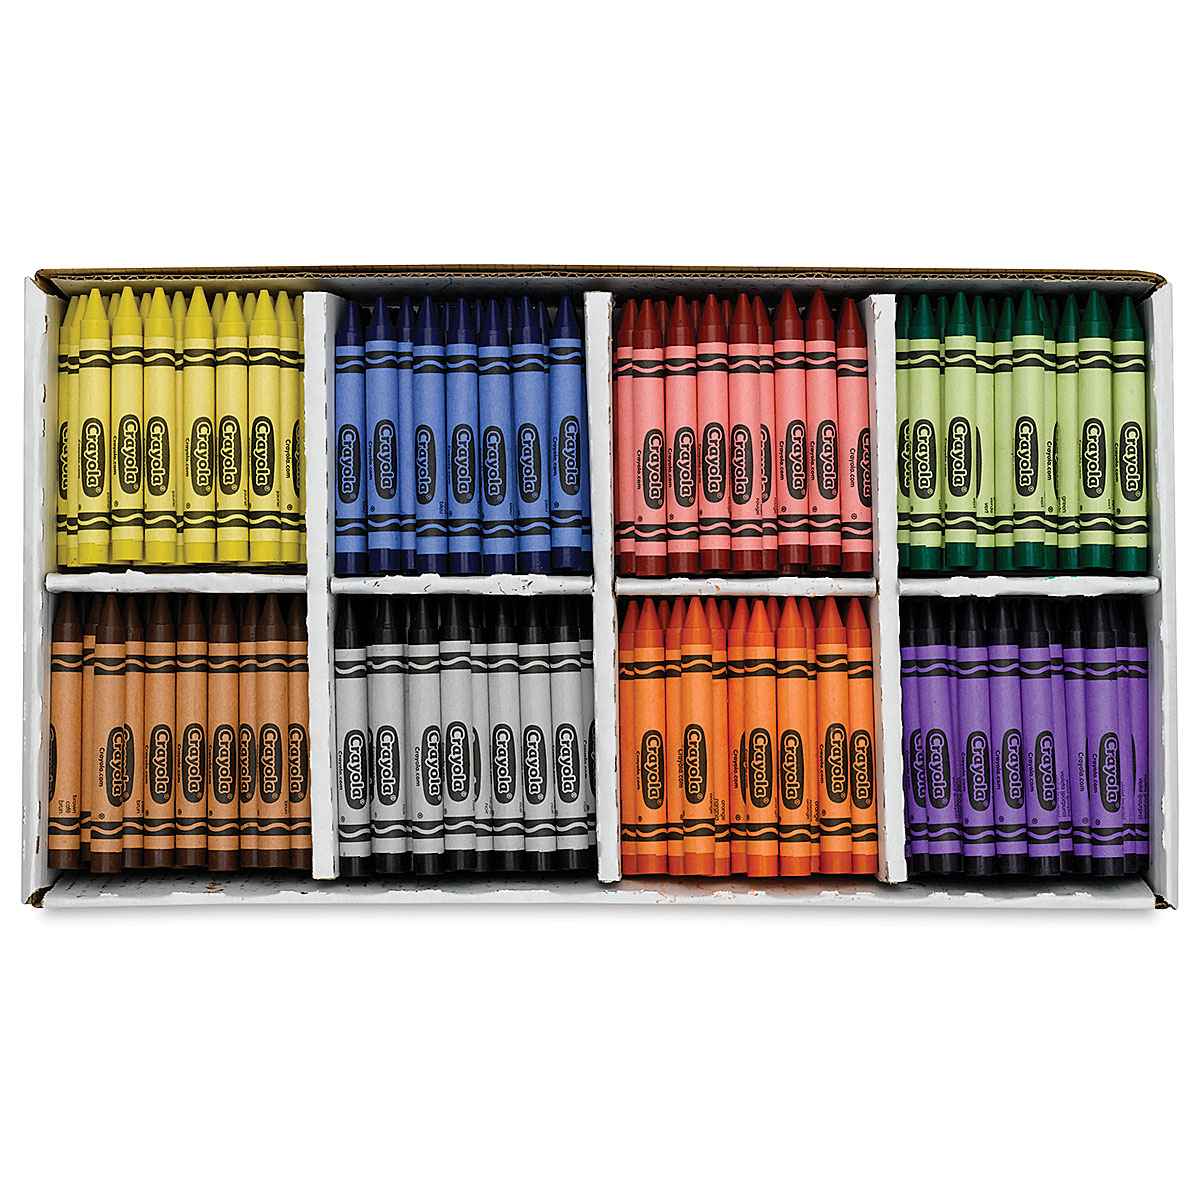 Crayon Classpack, Large Size, 8 Colors, 400 Count (400 crayons)